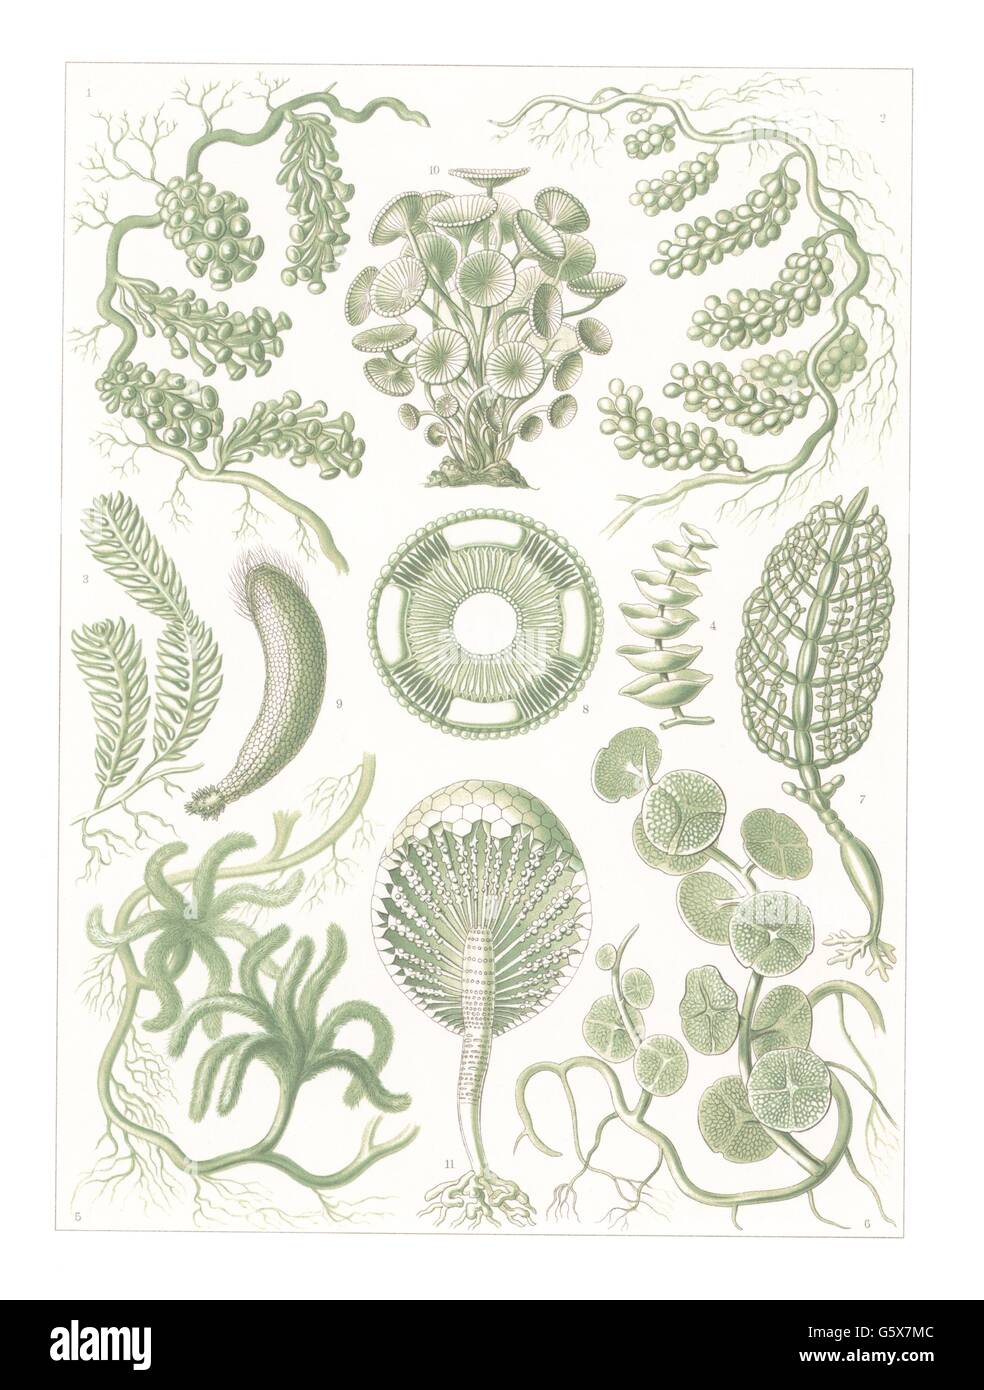 botanik, Siphonales (Siphoneae), Farblithographie, aus: Ernst Haeckel, 'Kunstformen der Natur', Leipzig - Wien, 1899 - 1904, Additional-Rights-Clearences-not available Stockfoto